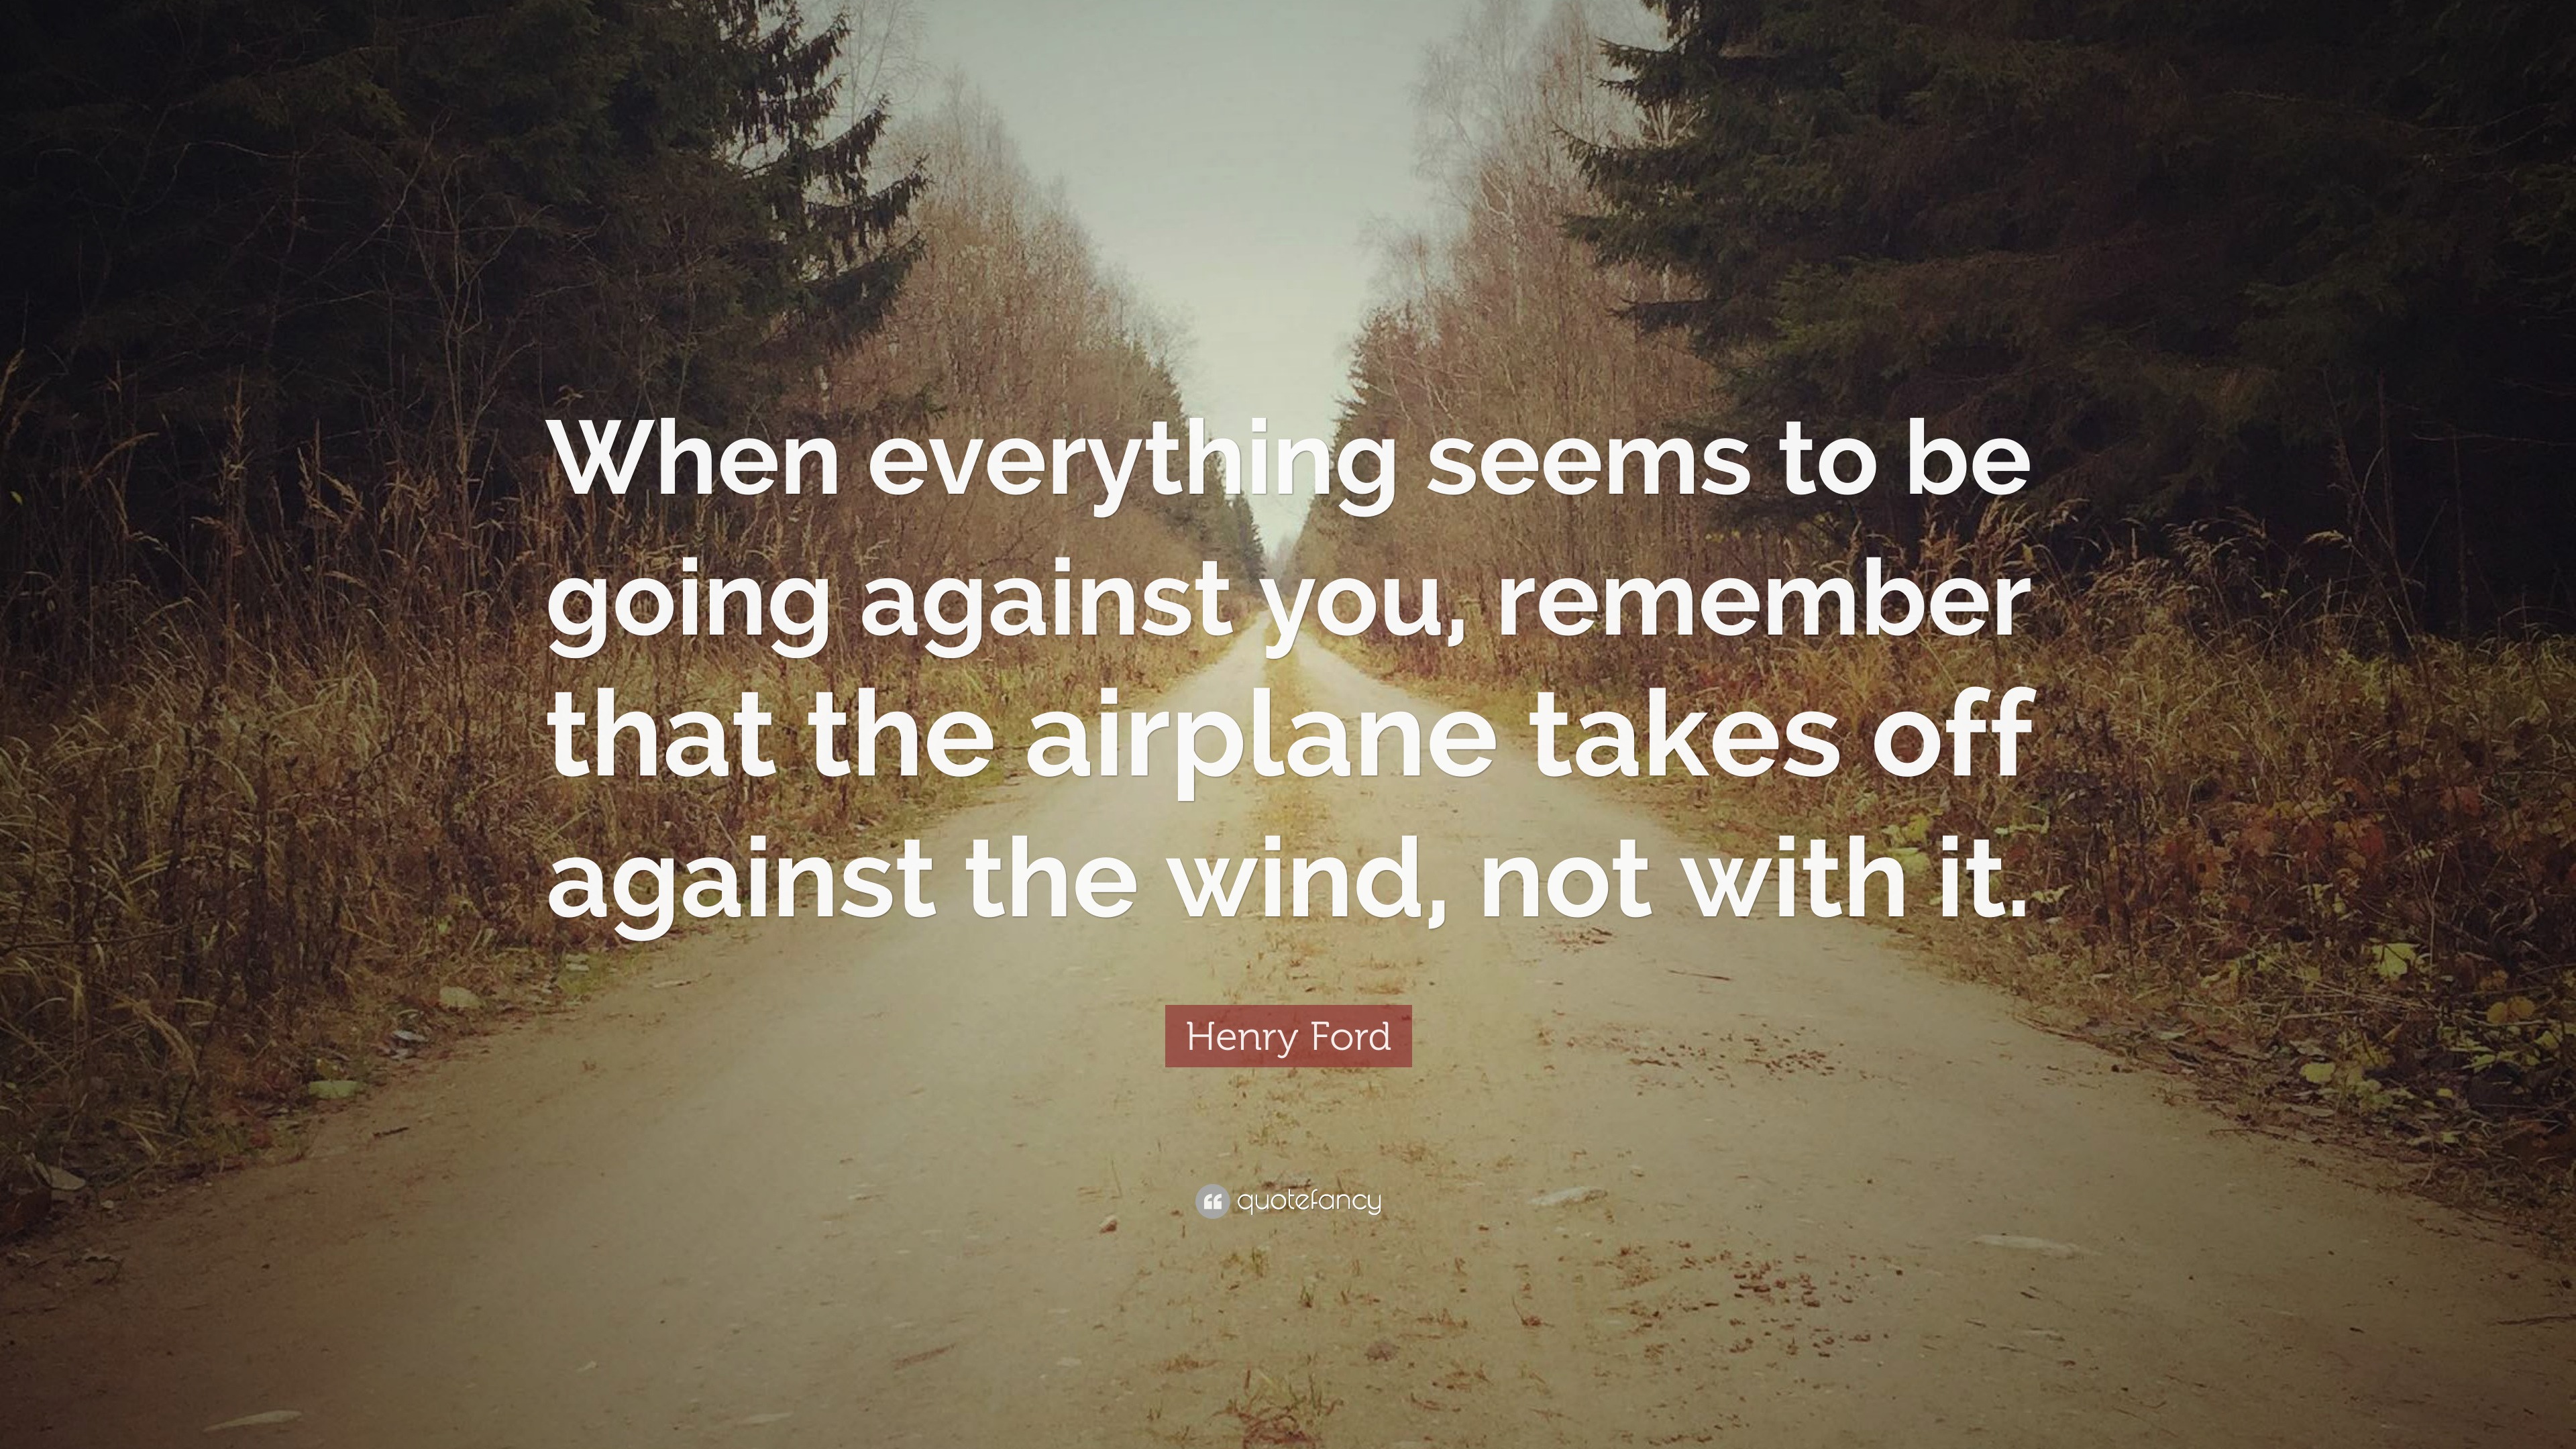 Henry Ford Quote: “When everything seems to be going against you